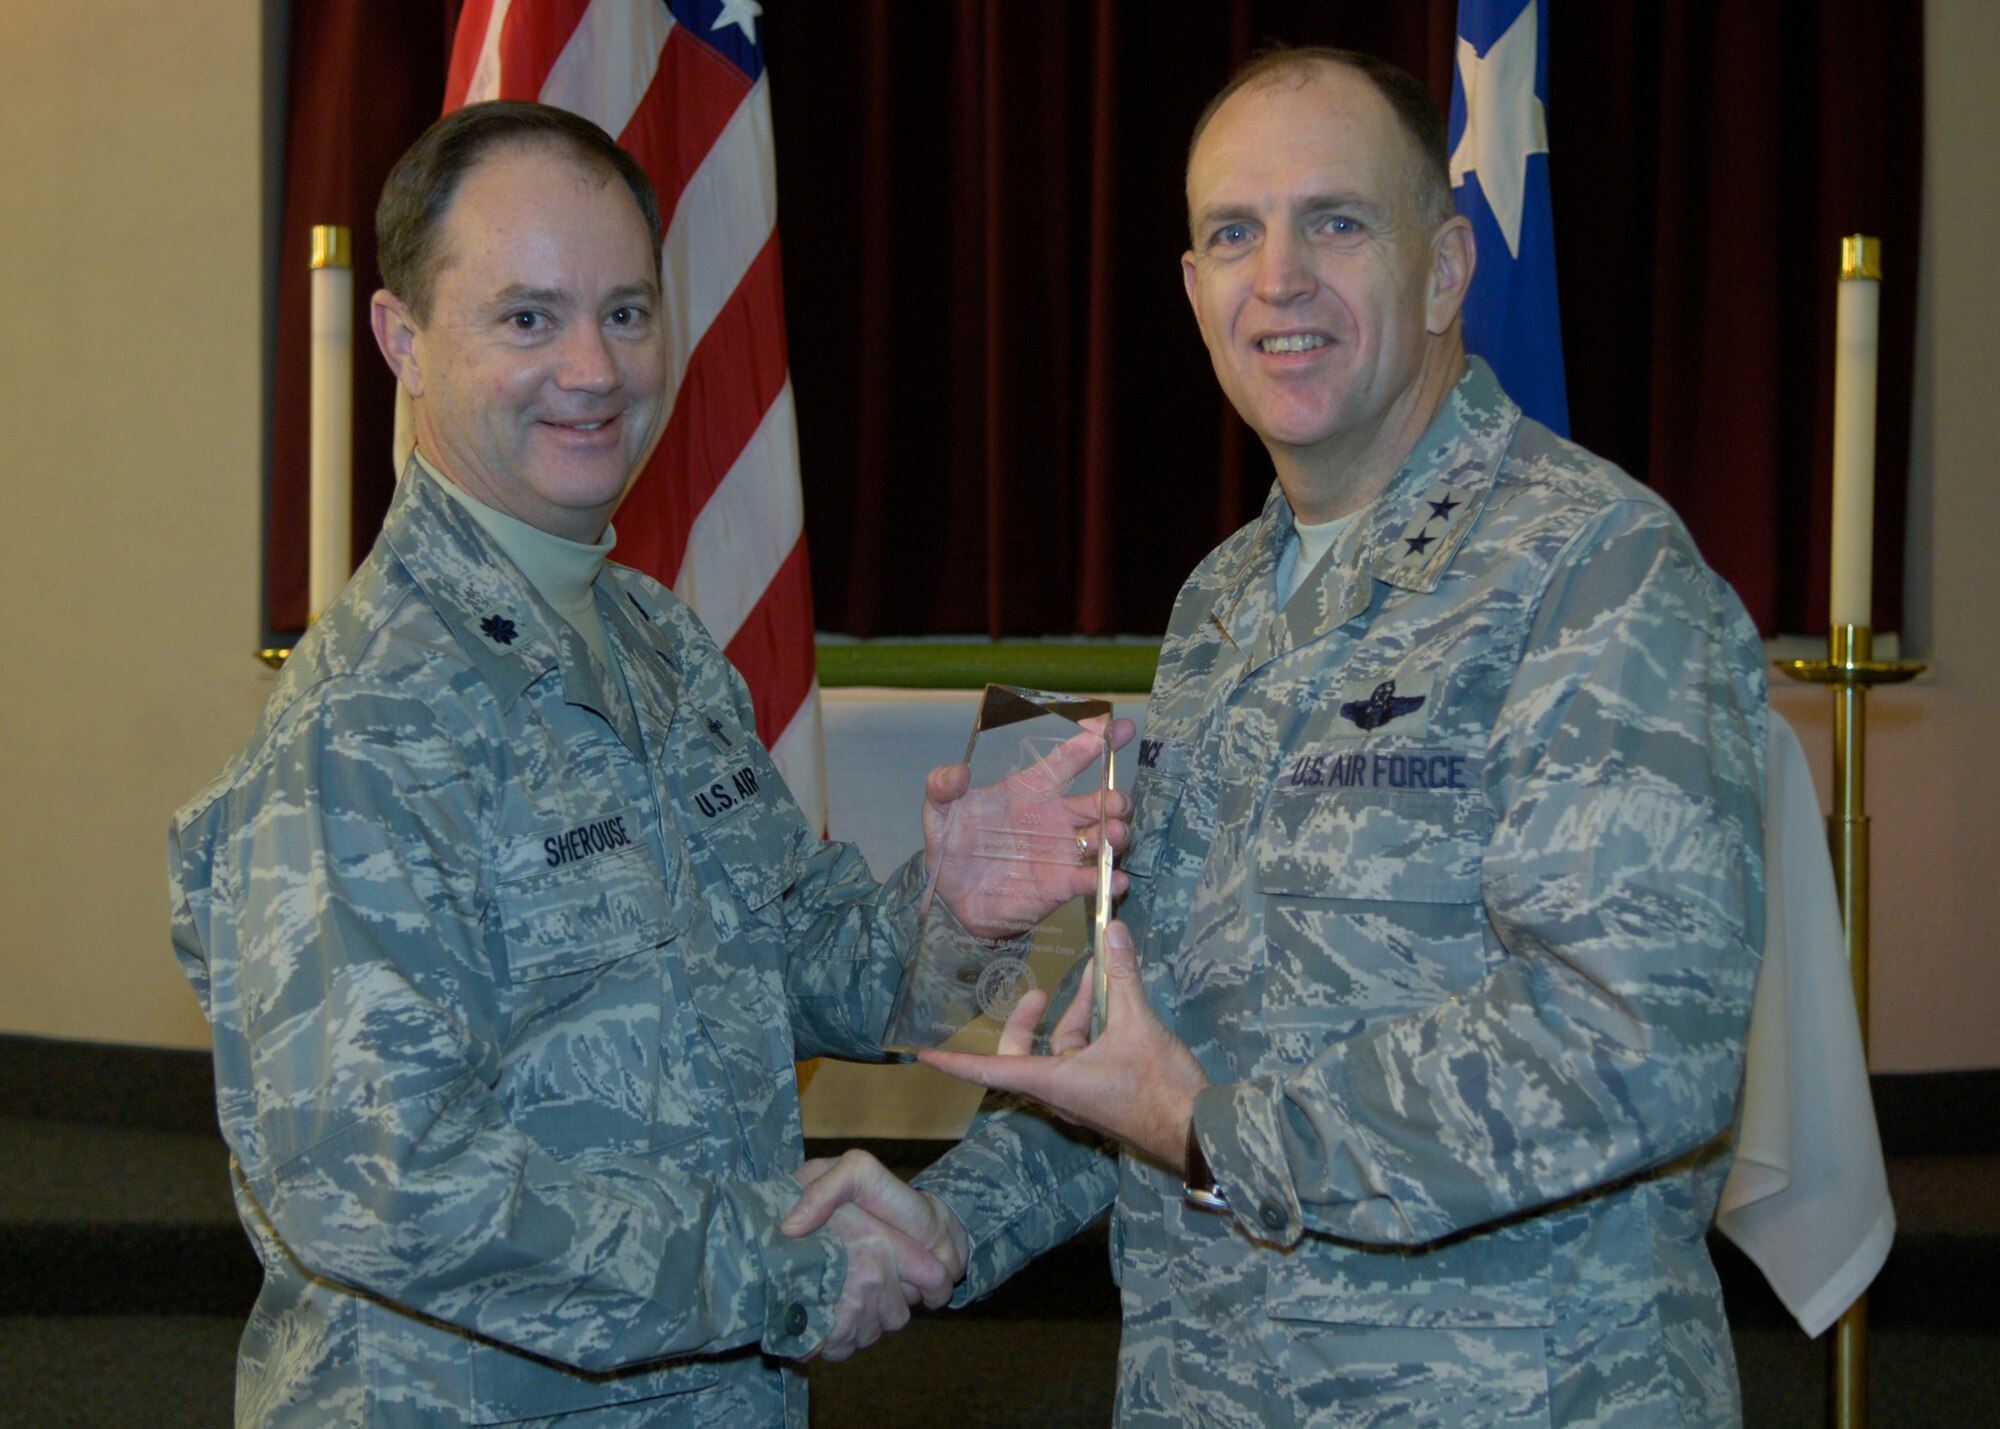 Maj. Gen. Ralph Jodice, Air Force District of Washington commander, presents the AFDW Outstanding Medium Chapel Organization Award to Chaplain (Lt. Col.) Paul Sherouse, 316th Wing Chaplain. The award presentation, which honors staff of the Andrews Air Force Base, Md., Chaplain Corps, took place Feb. 25, 2009, at the Andrews chapel.  (U.S Air Force photo by Senior Airman Renae Kleckner.)